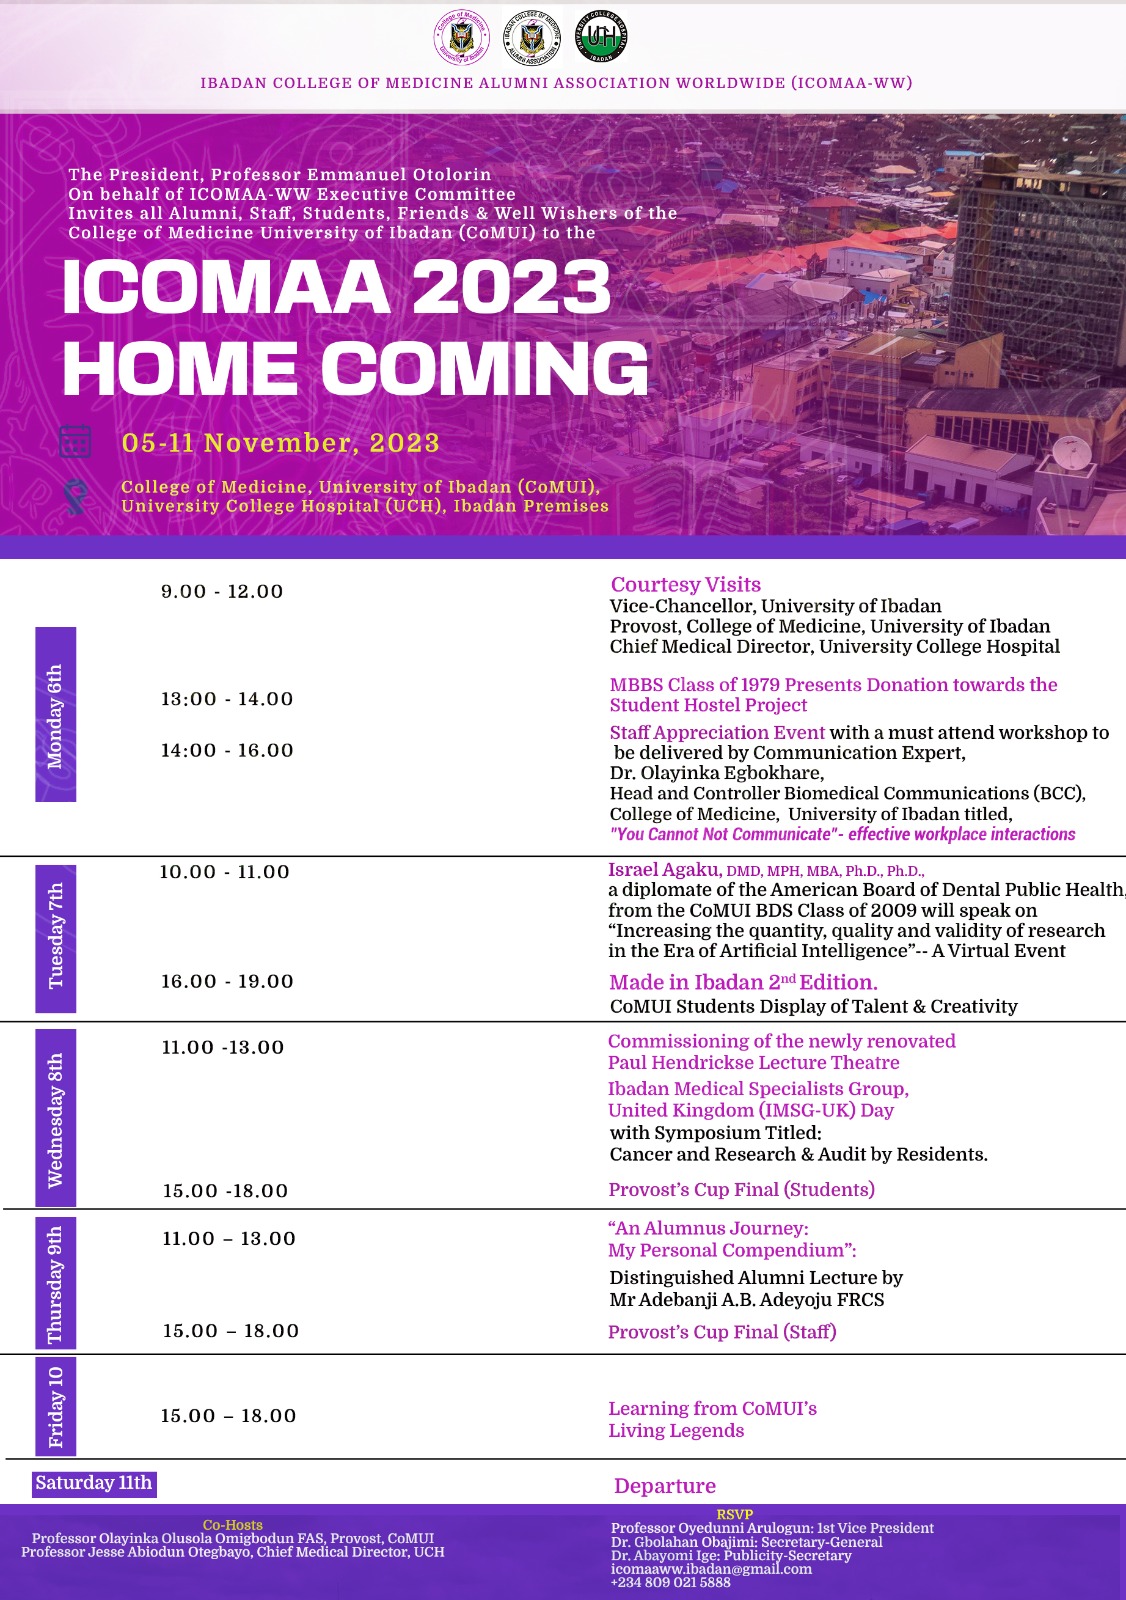 It's the Countdown to ICOMAA 2023 Homecoming